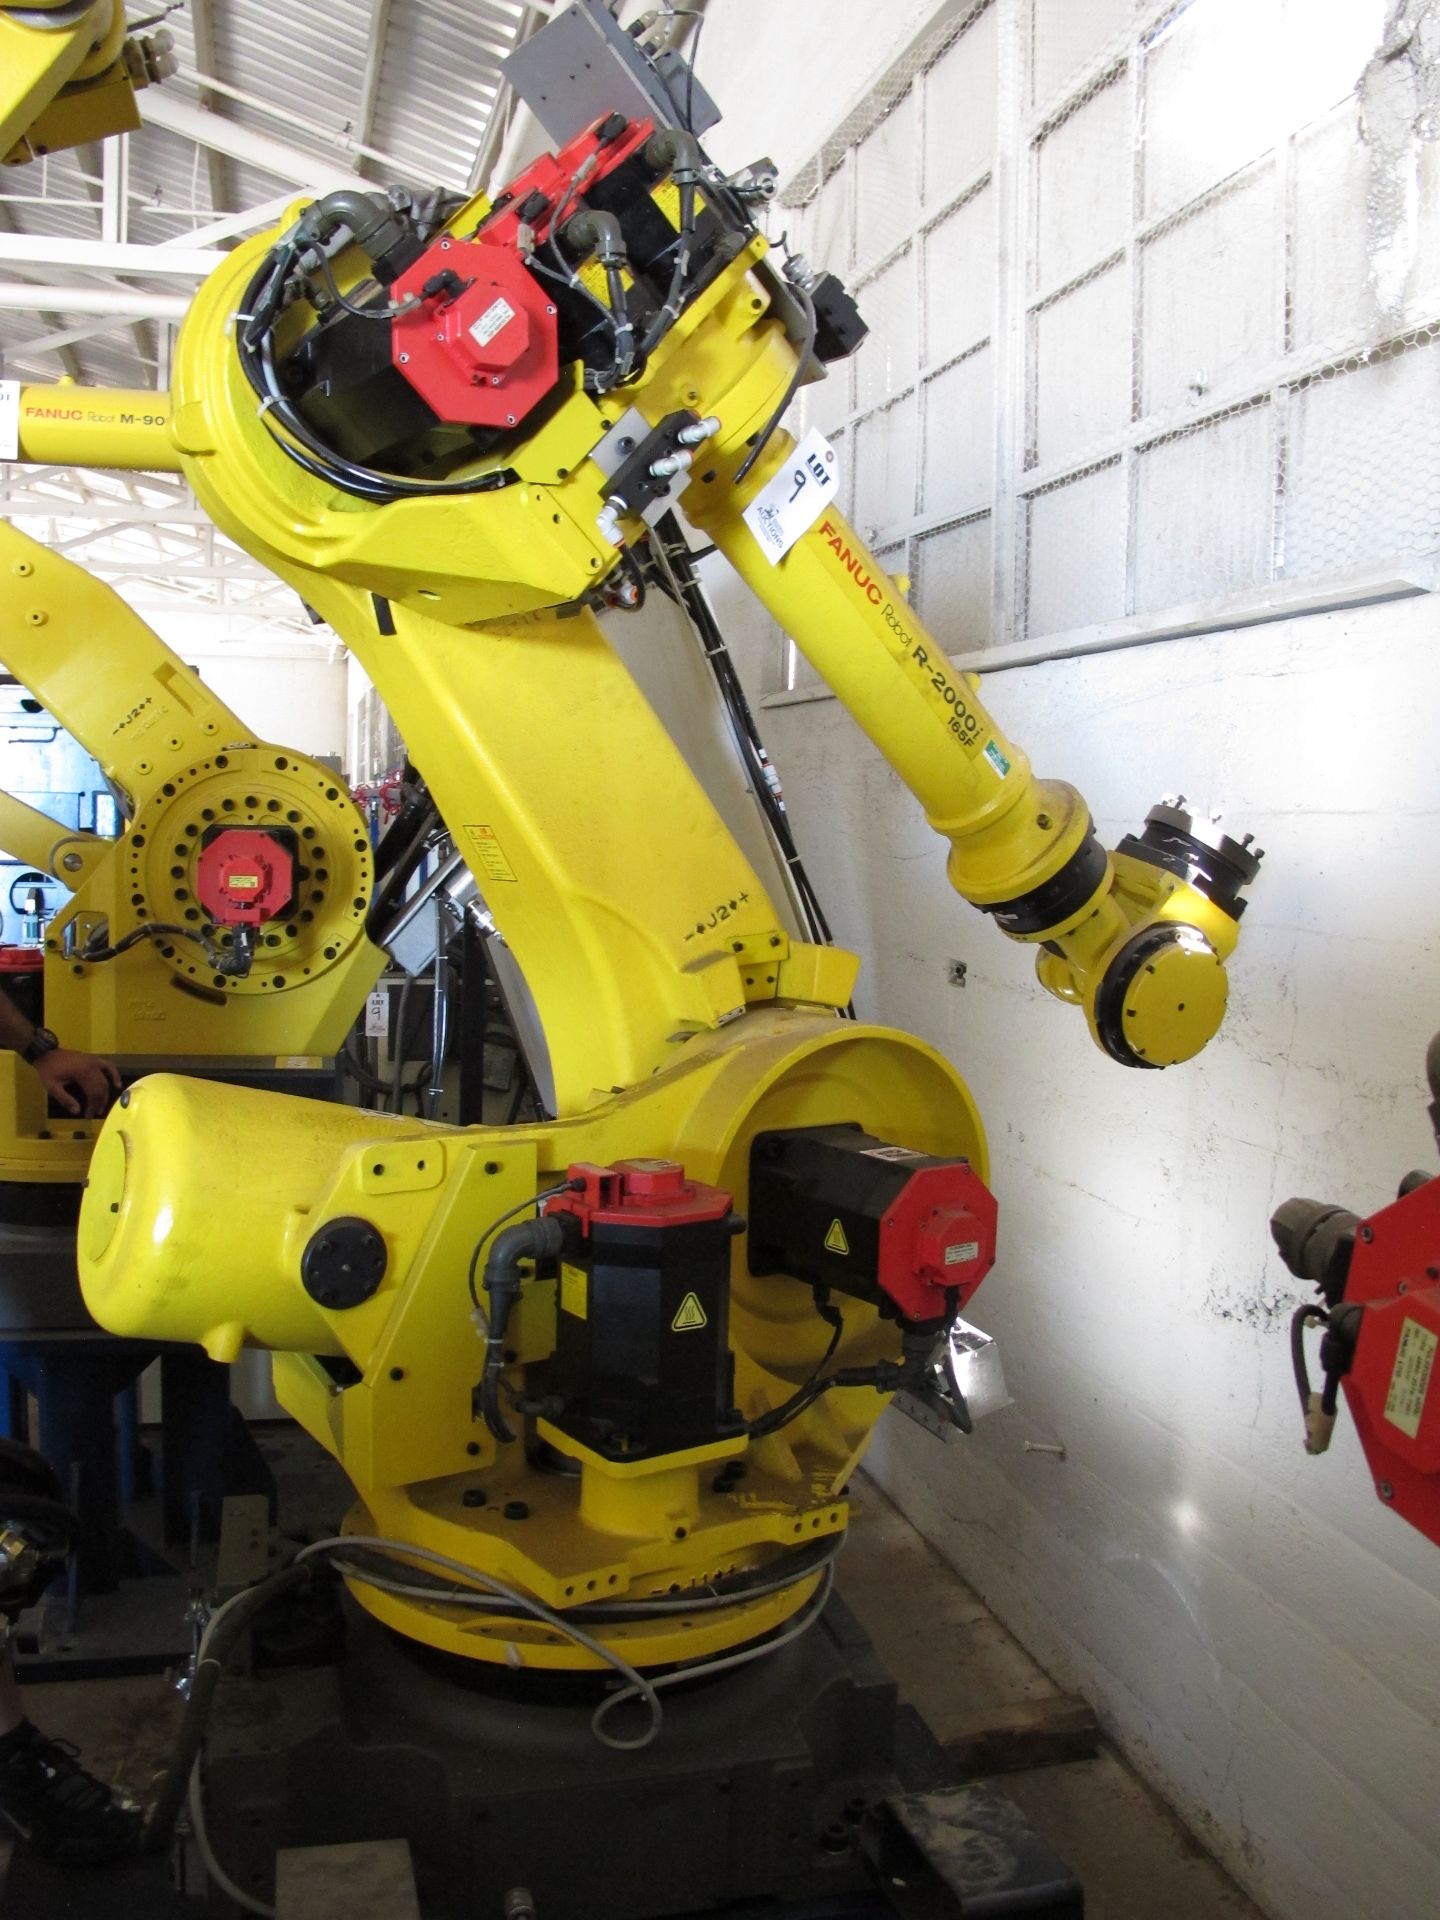 FANUC INDUSTRIAL JOINTED ARM ROBOT, MODEL R-2000i 165F, TYPE A05B-1324-B203, MANUFACTURED MAY